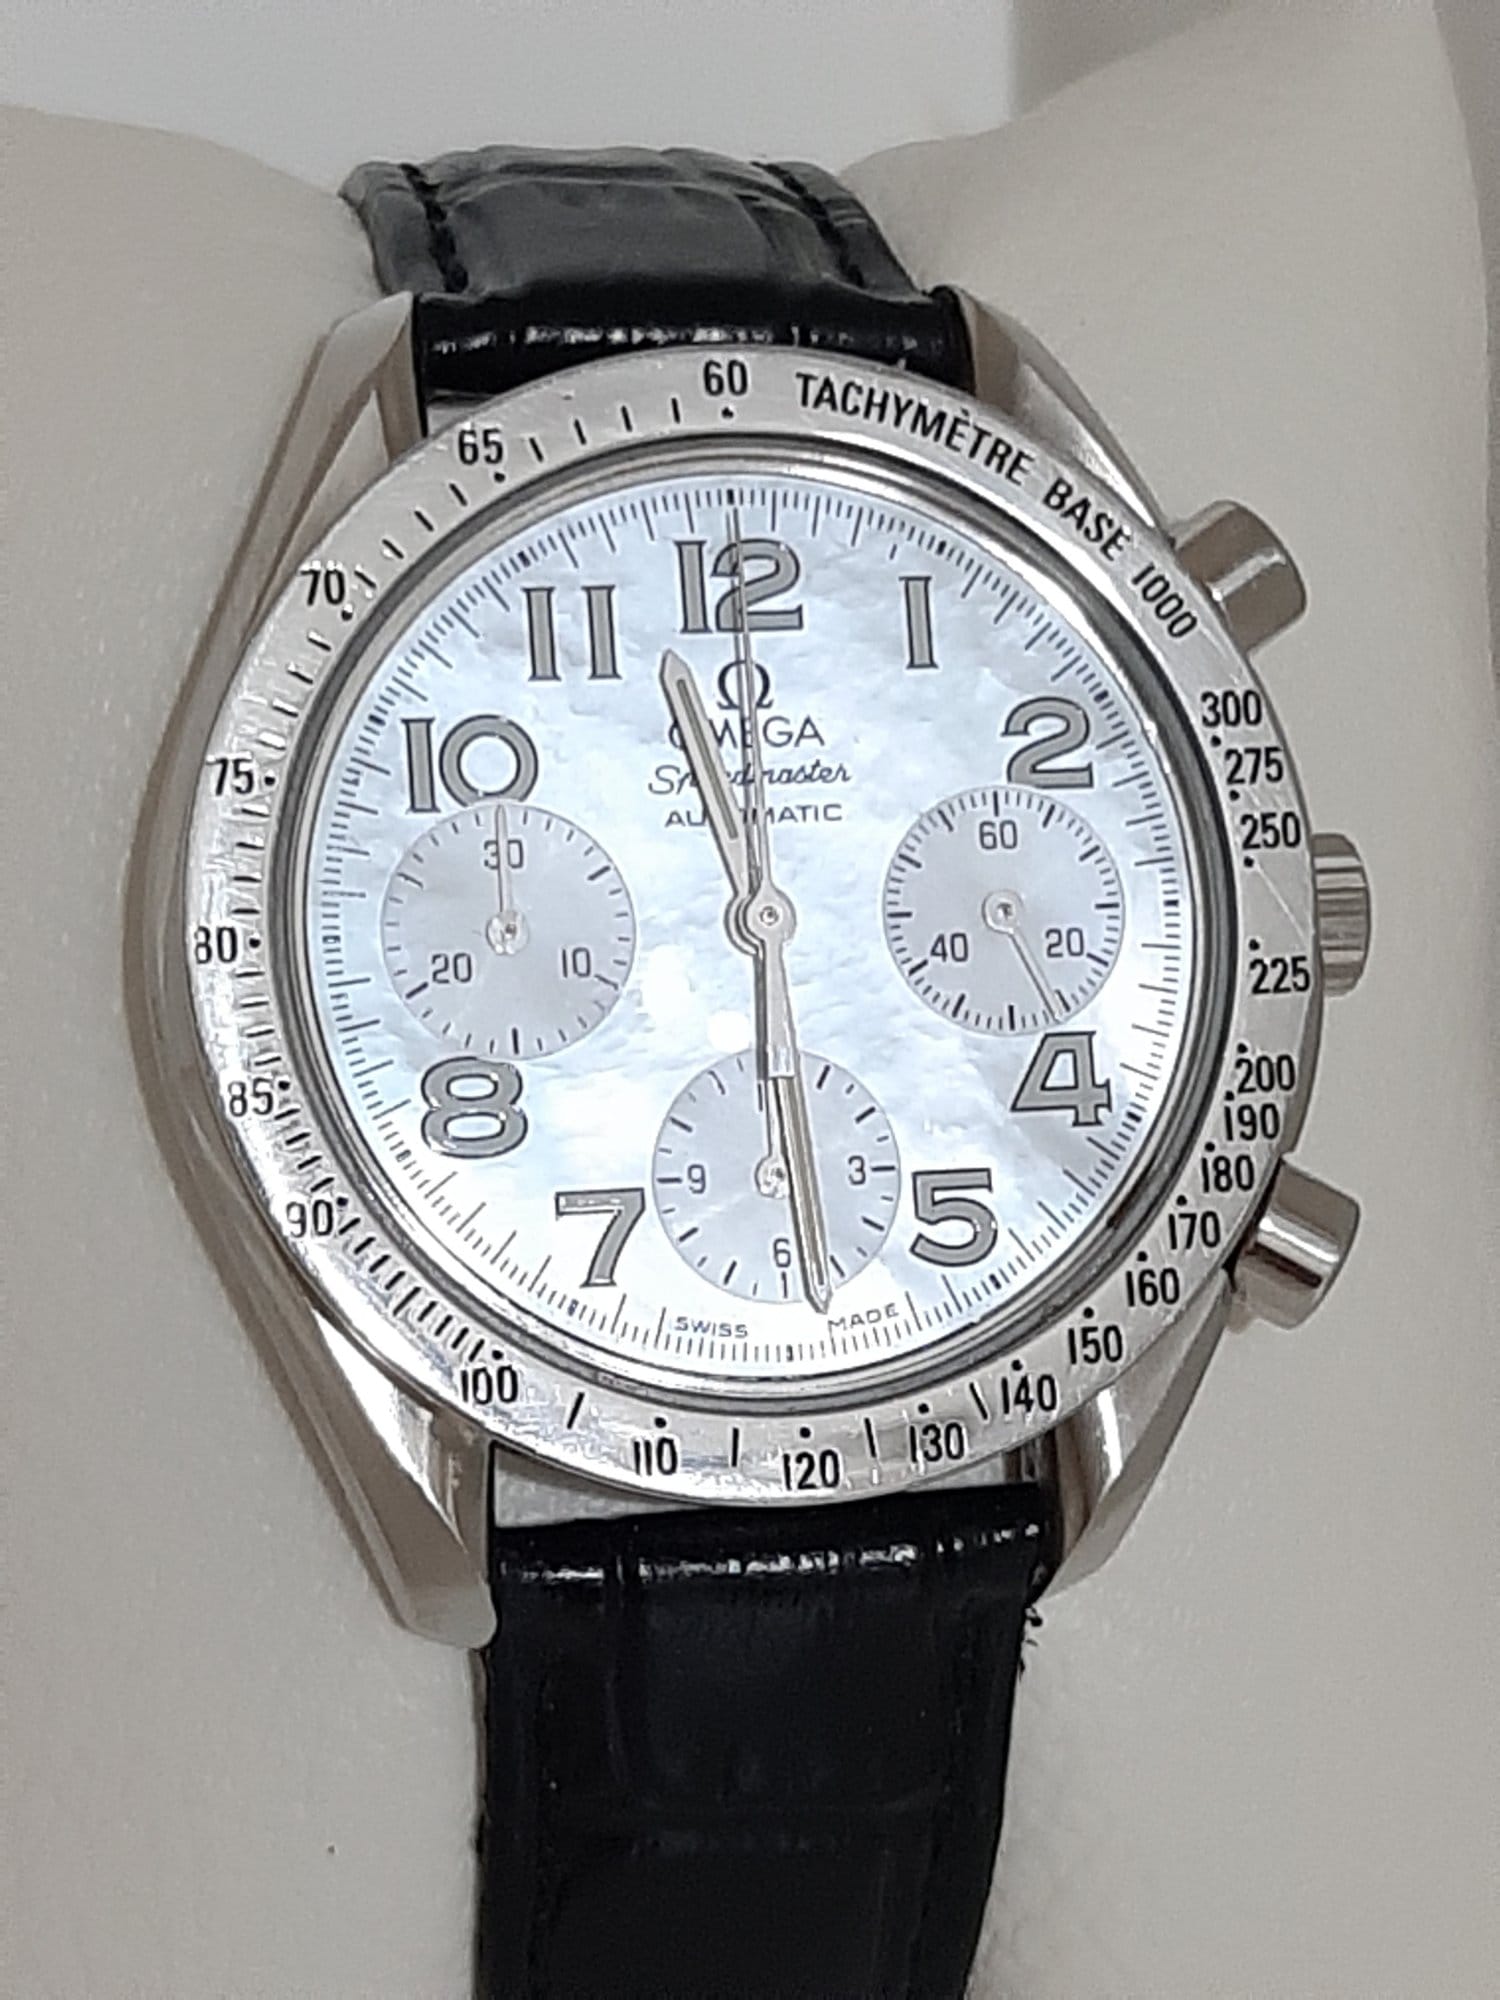 “Mother of Pearl” light dial with steel polished tachymètre bezel. Arabic numbers next to the hour indices. Silver hands. Omega Speedmaster Reduced 3834.70.36